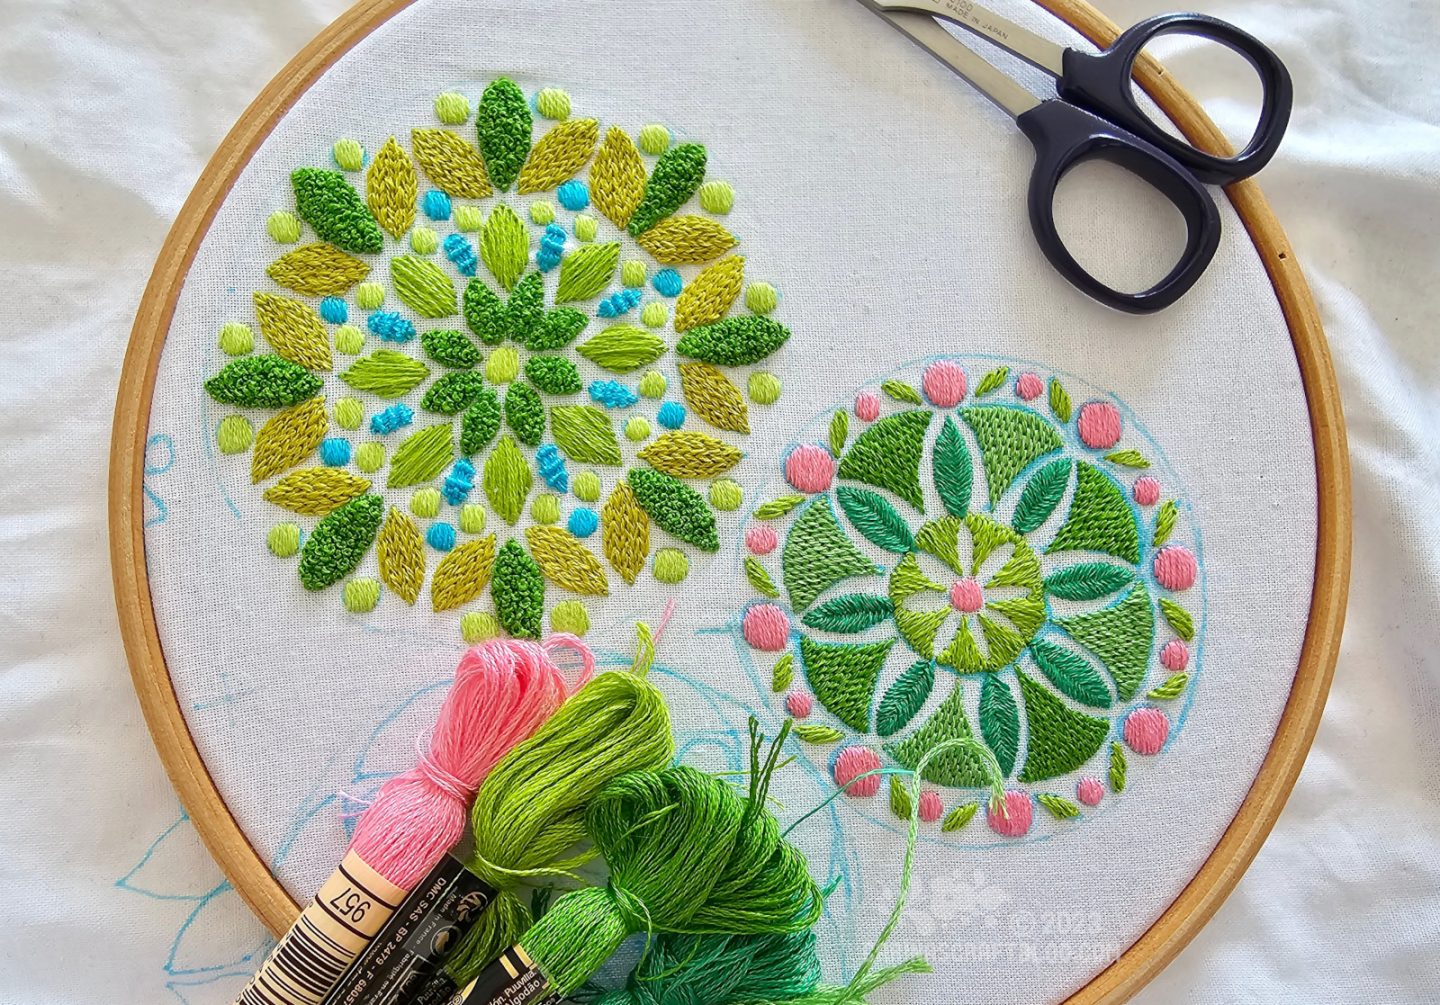 Two mandala inspired designs in green colours embroidered on white fabric framed in a wooden embroidery hoop.